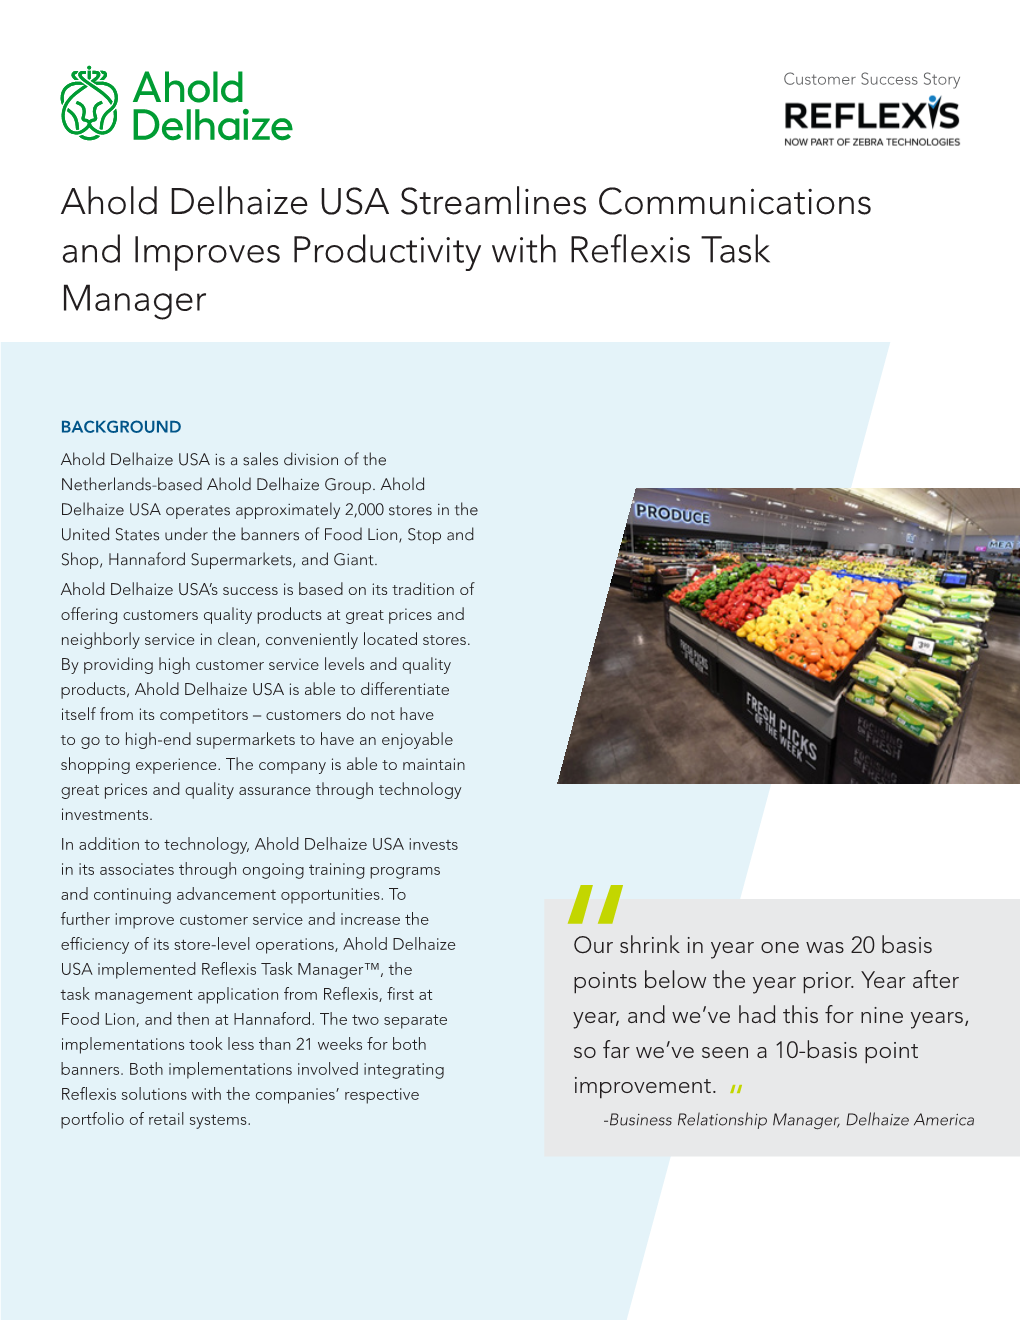 Ahold Delhaize USA Streamlines Communications and Improves Productivity with Reflexis Task Manager